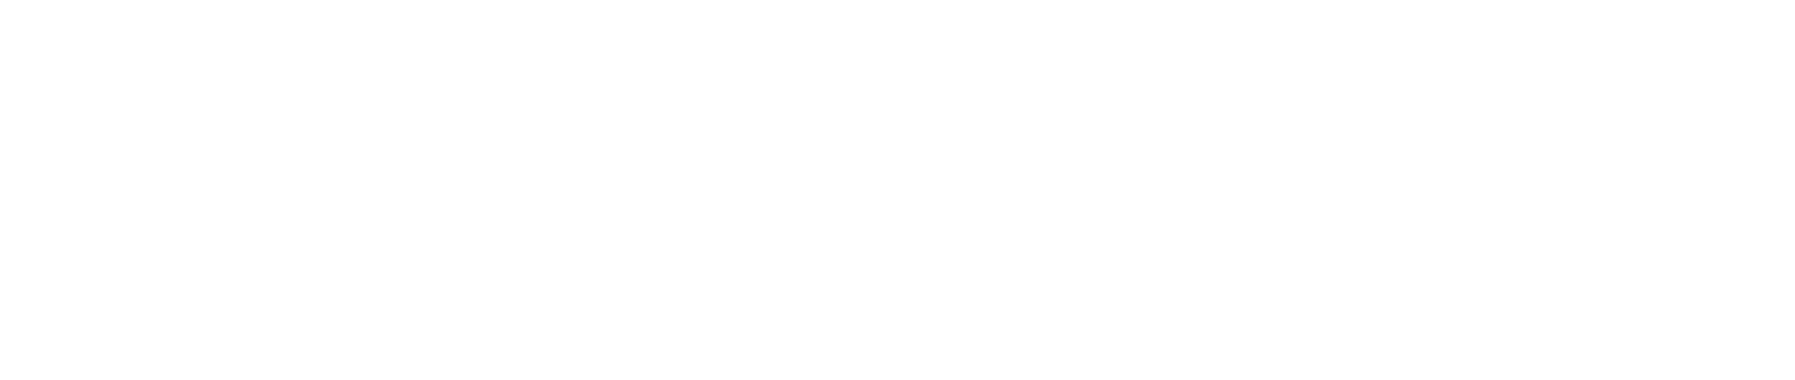 Connected Solutions is a technology by Thermo King designed to deliver information that matters to you. Putting this...